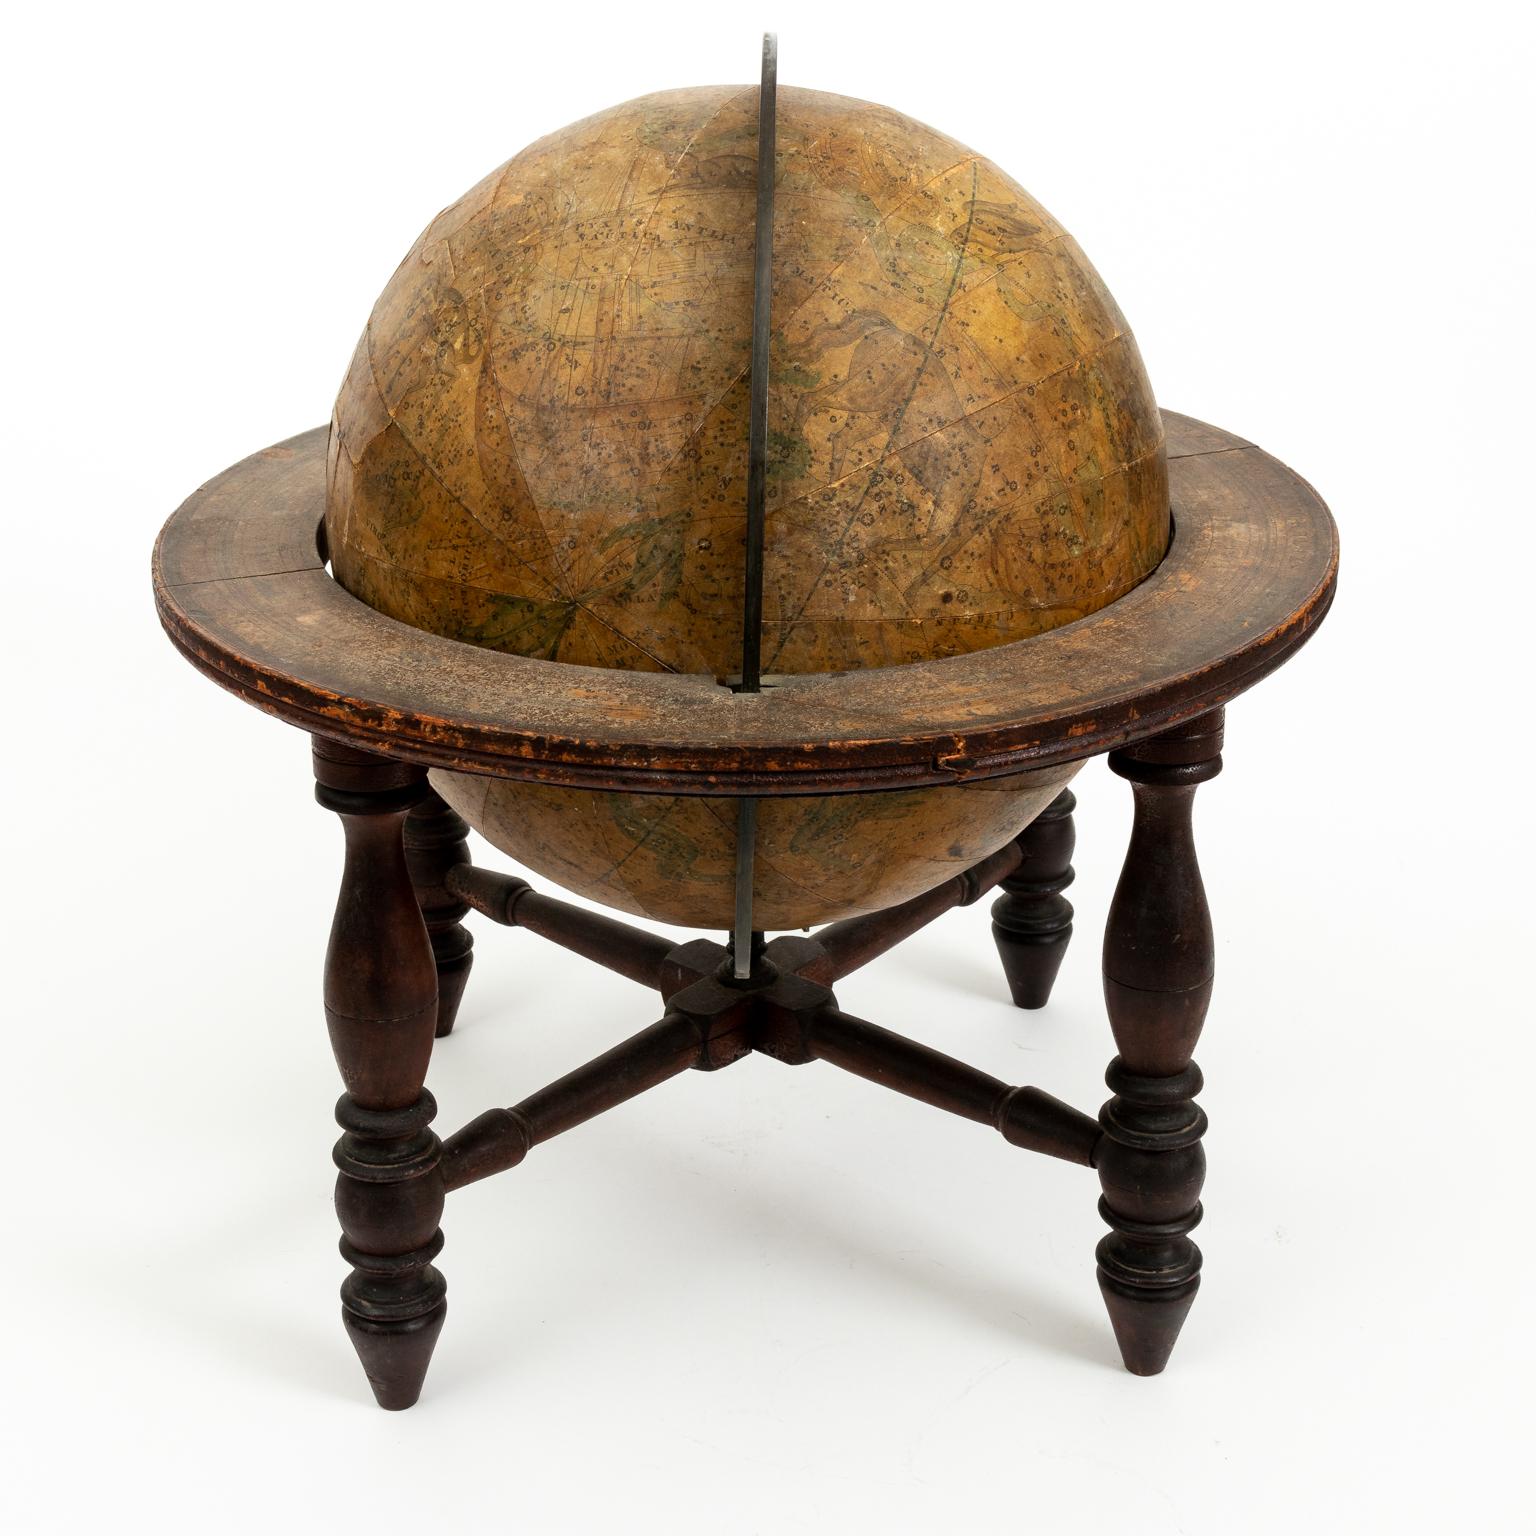 Circa 1838 large 12.00 inch globe with original surface on ball-and-ring turned stand. Made in Boston, Massachusetts, United States. Please note of wear consistent with age including finish loss to the wood and globe along with minor chips.